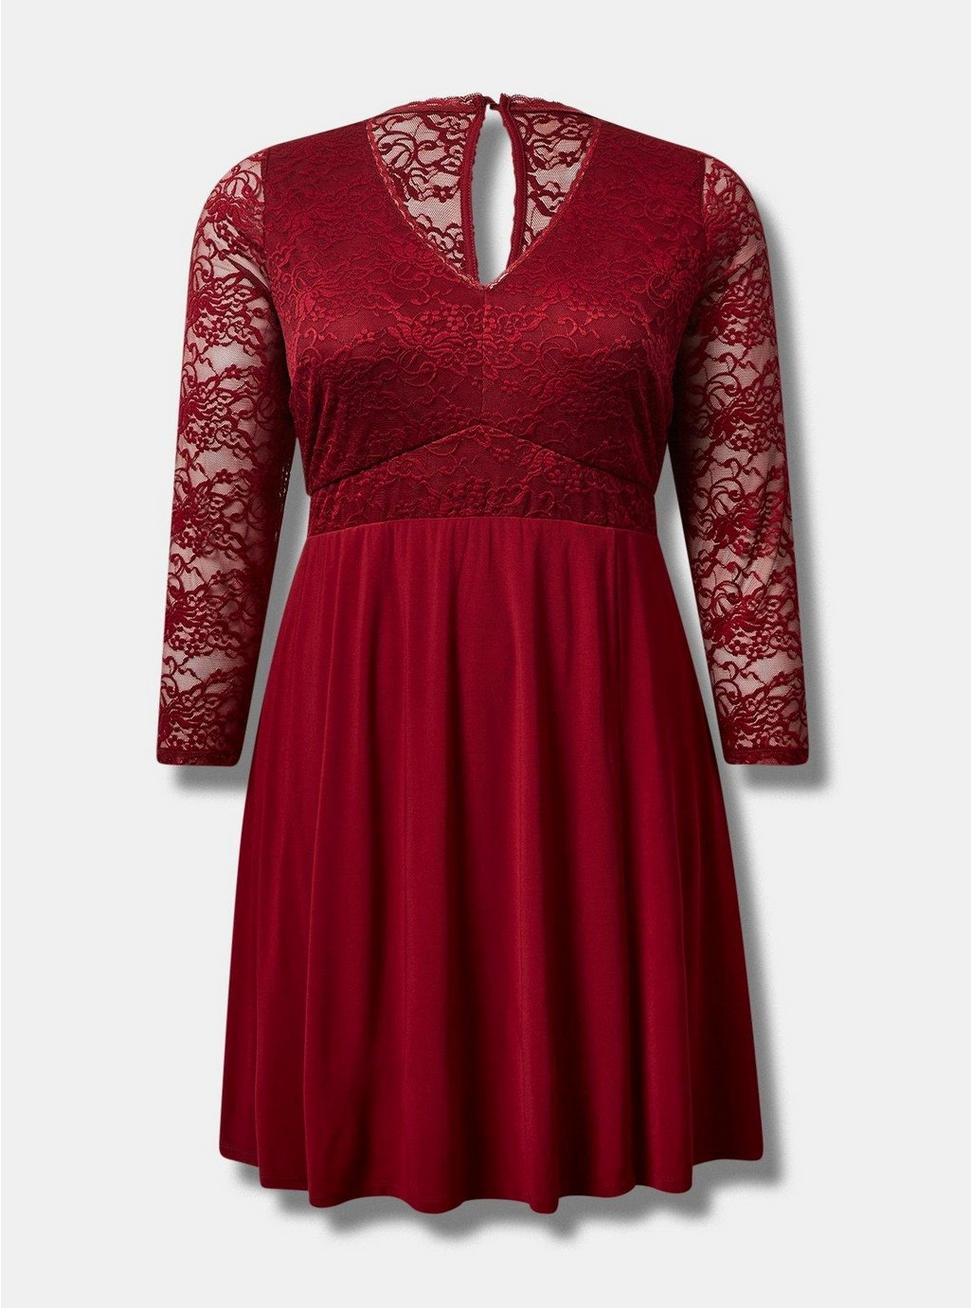 At The Knee Studio Knit Lace Sleeve Fit N Flare Dress, RHUBARB, hi-res